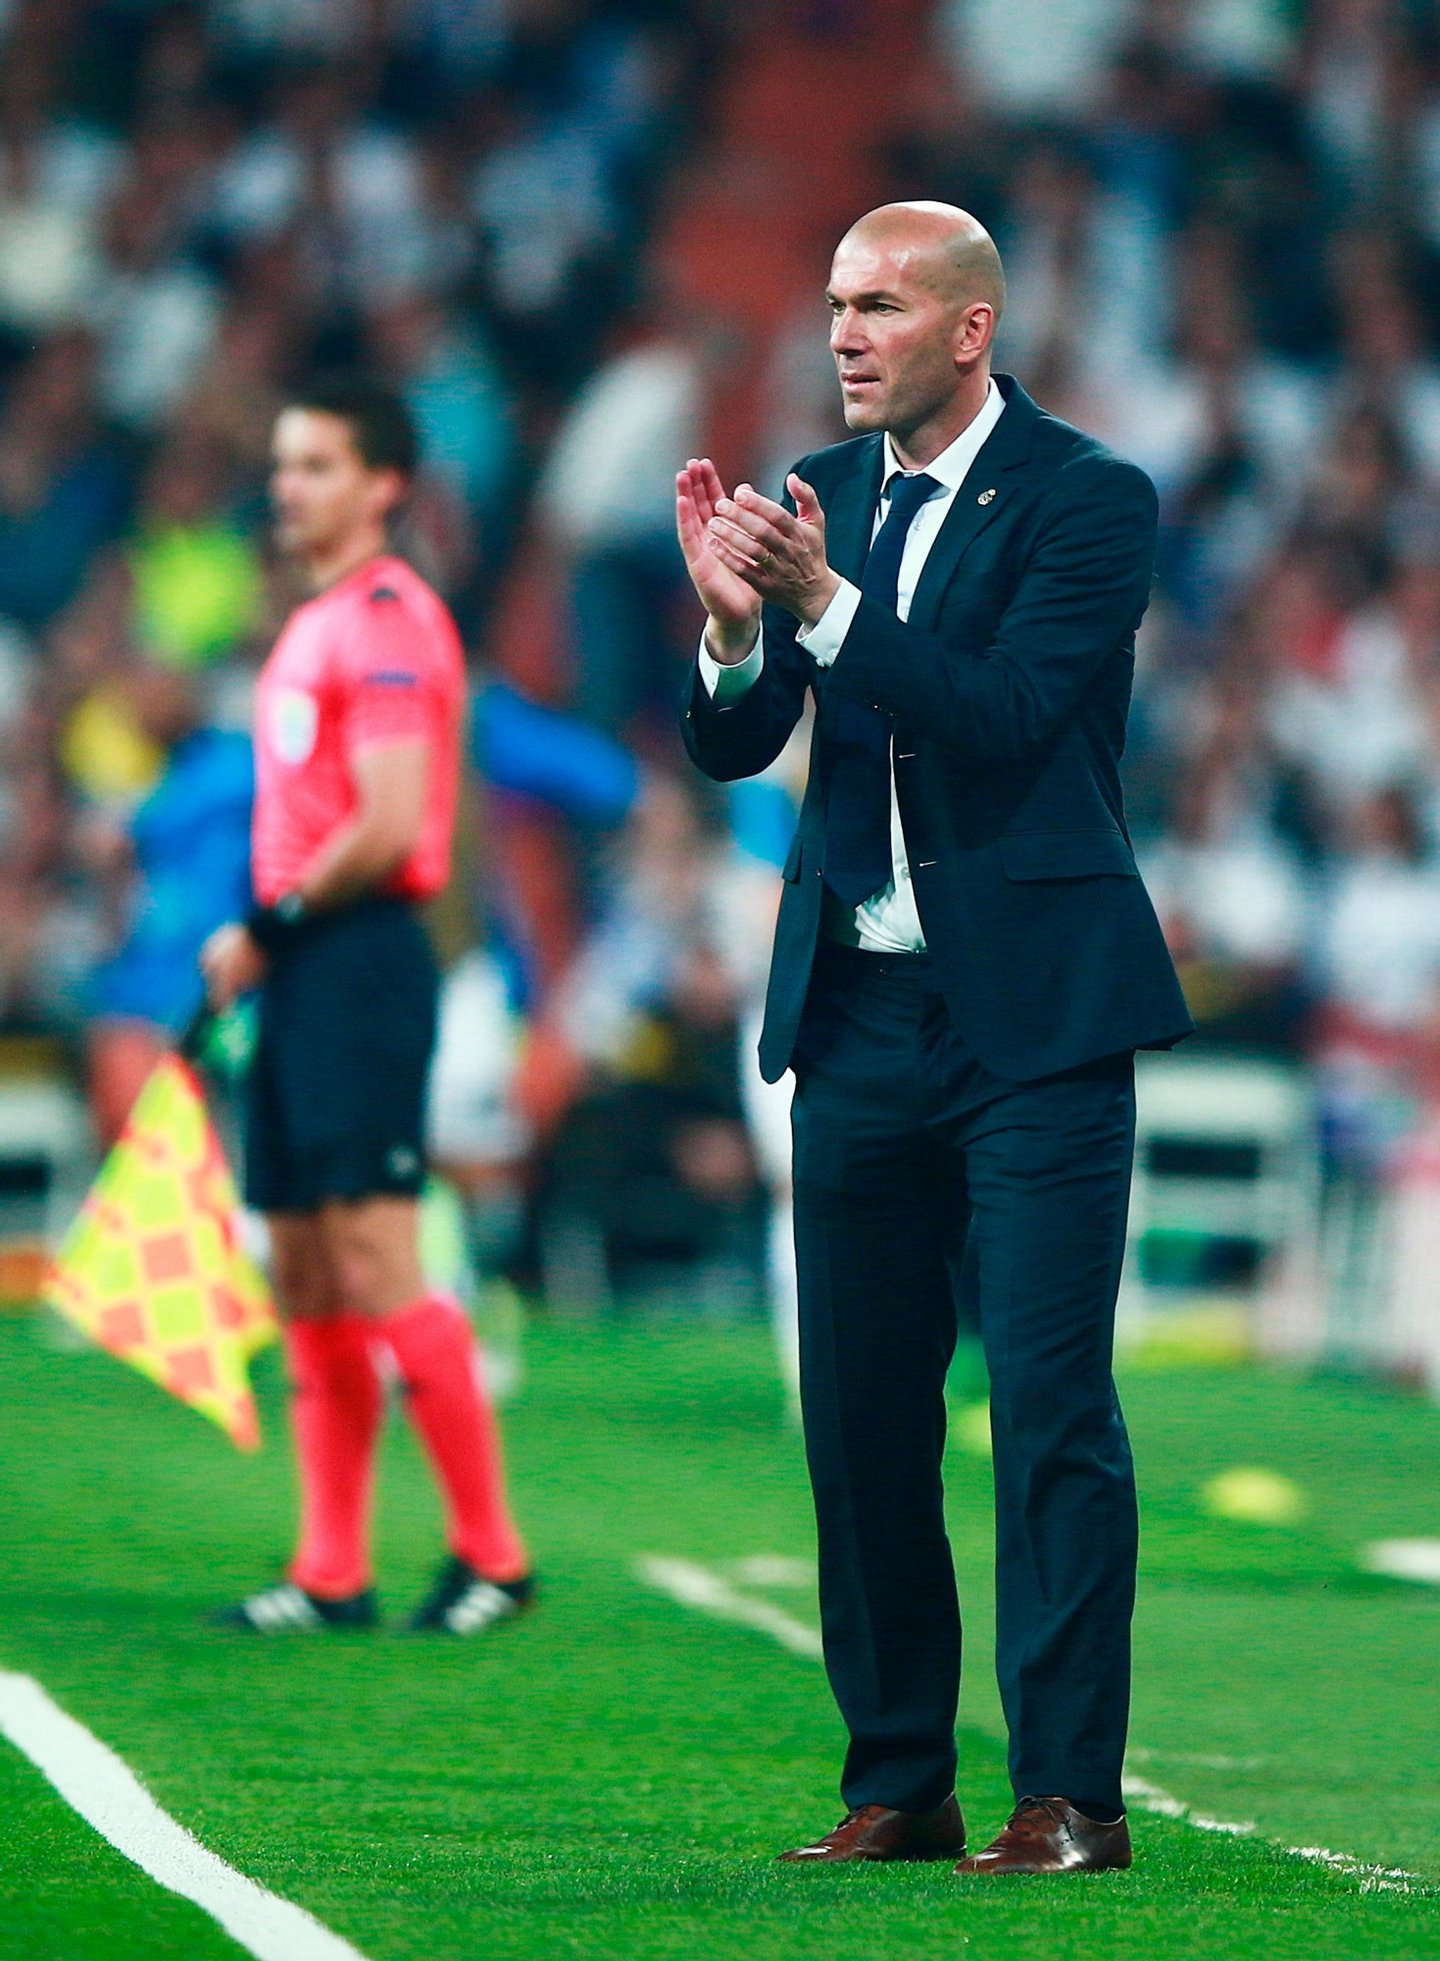 MADRID, SPAIN - MAY 04: Zinedine Zidane the head coach of Real Madrid reacts during the UEFA Champions League semi final, second leg match between Real Madrid and Manchester City FC at Estadio Santiago Bernabeu on May 4, 2016 in Madrid, Spain. (Photo by Gonzalo Arroyo Moreno/Getty Images)